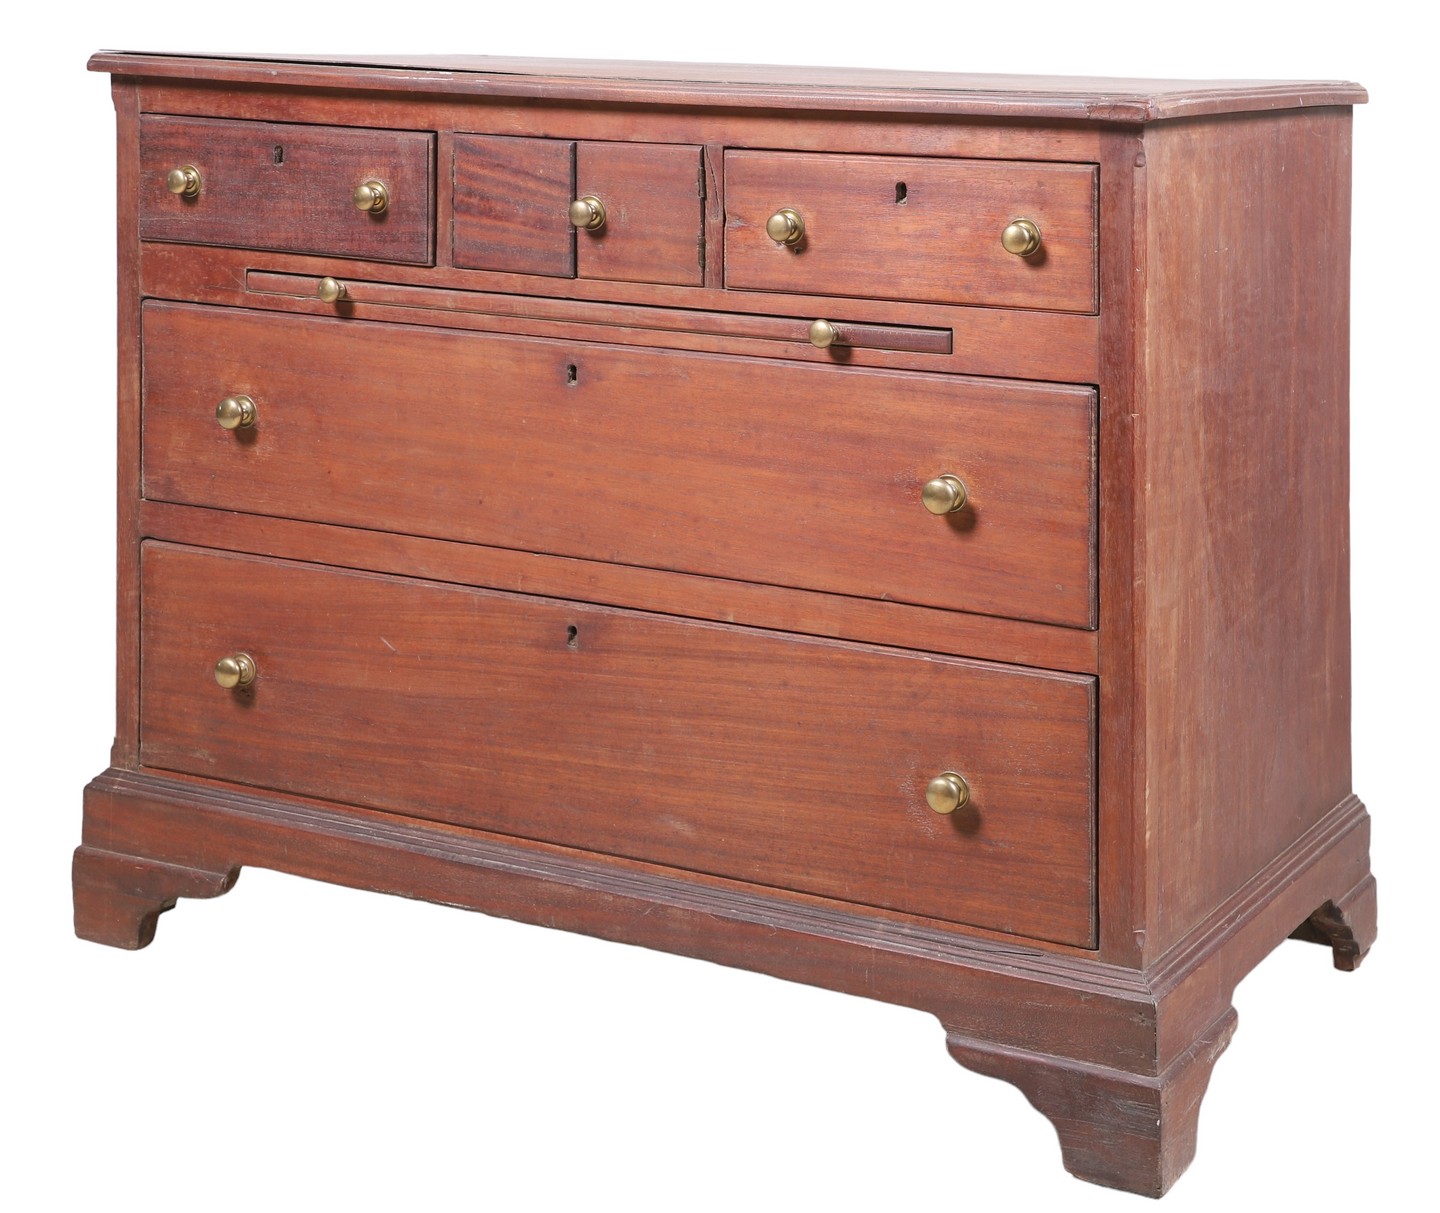 Mahogany chest of drawers, top